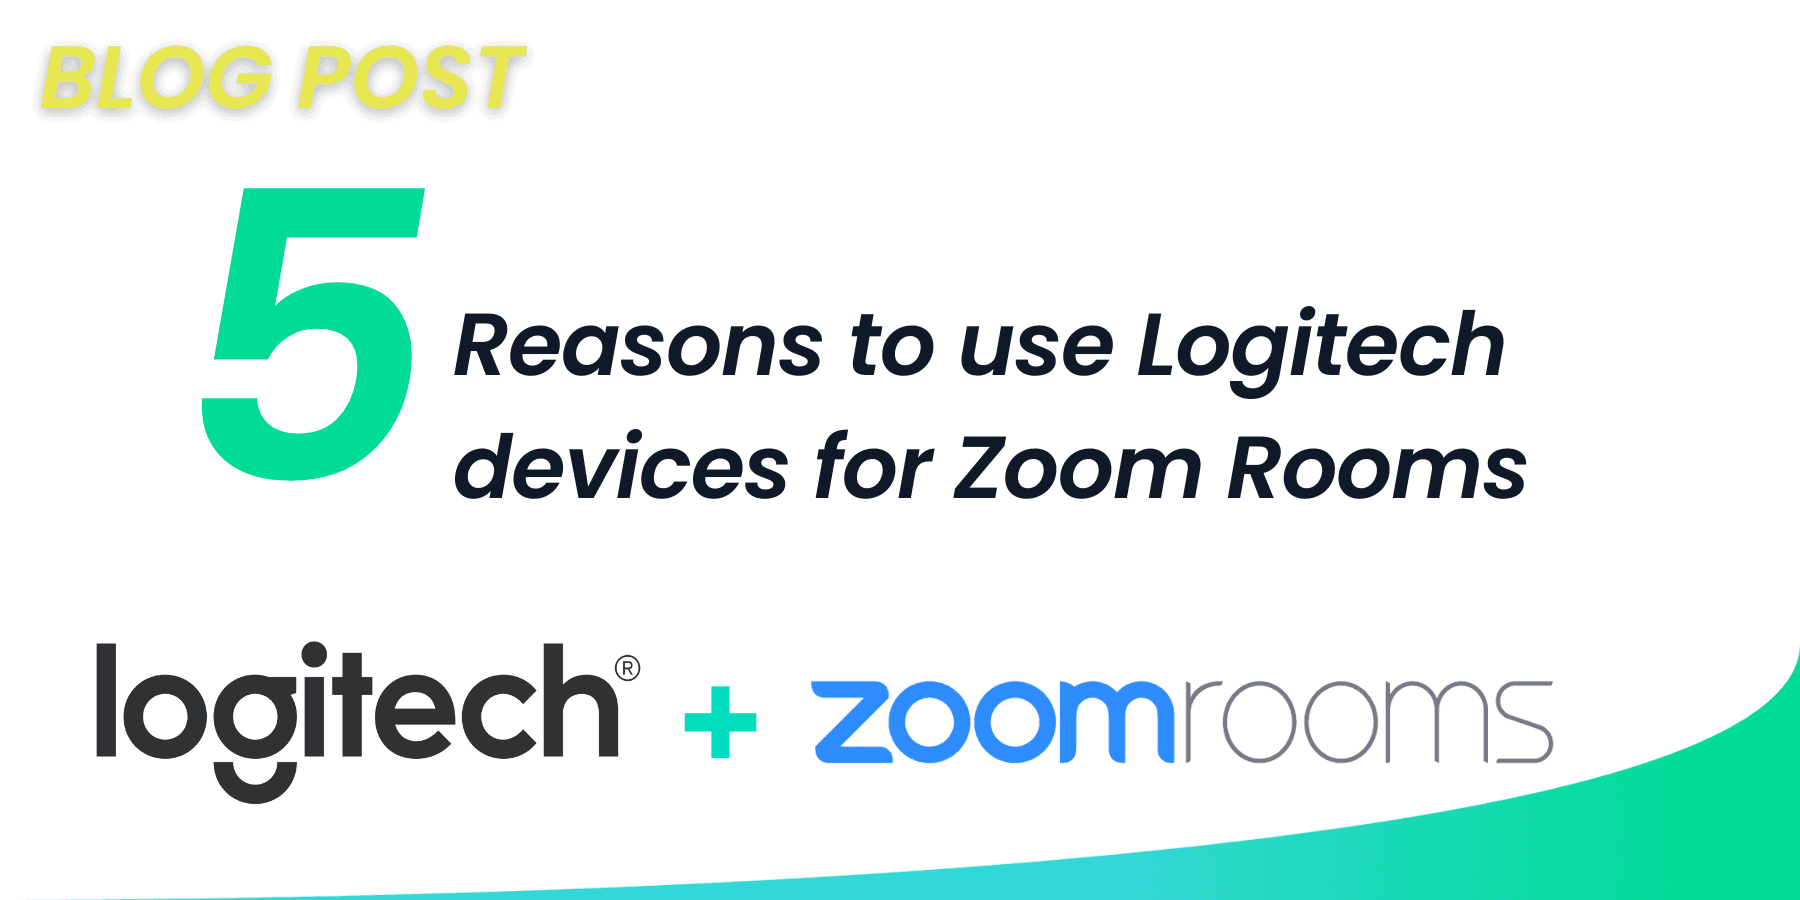 Featured image for “5 reasons to use Logitech devices for Zoom Rooms”